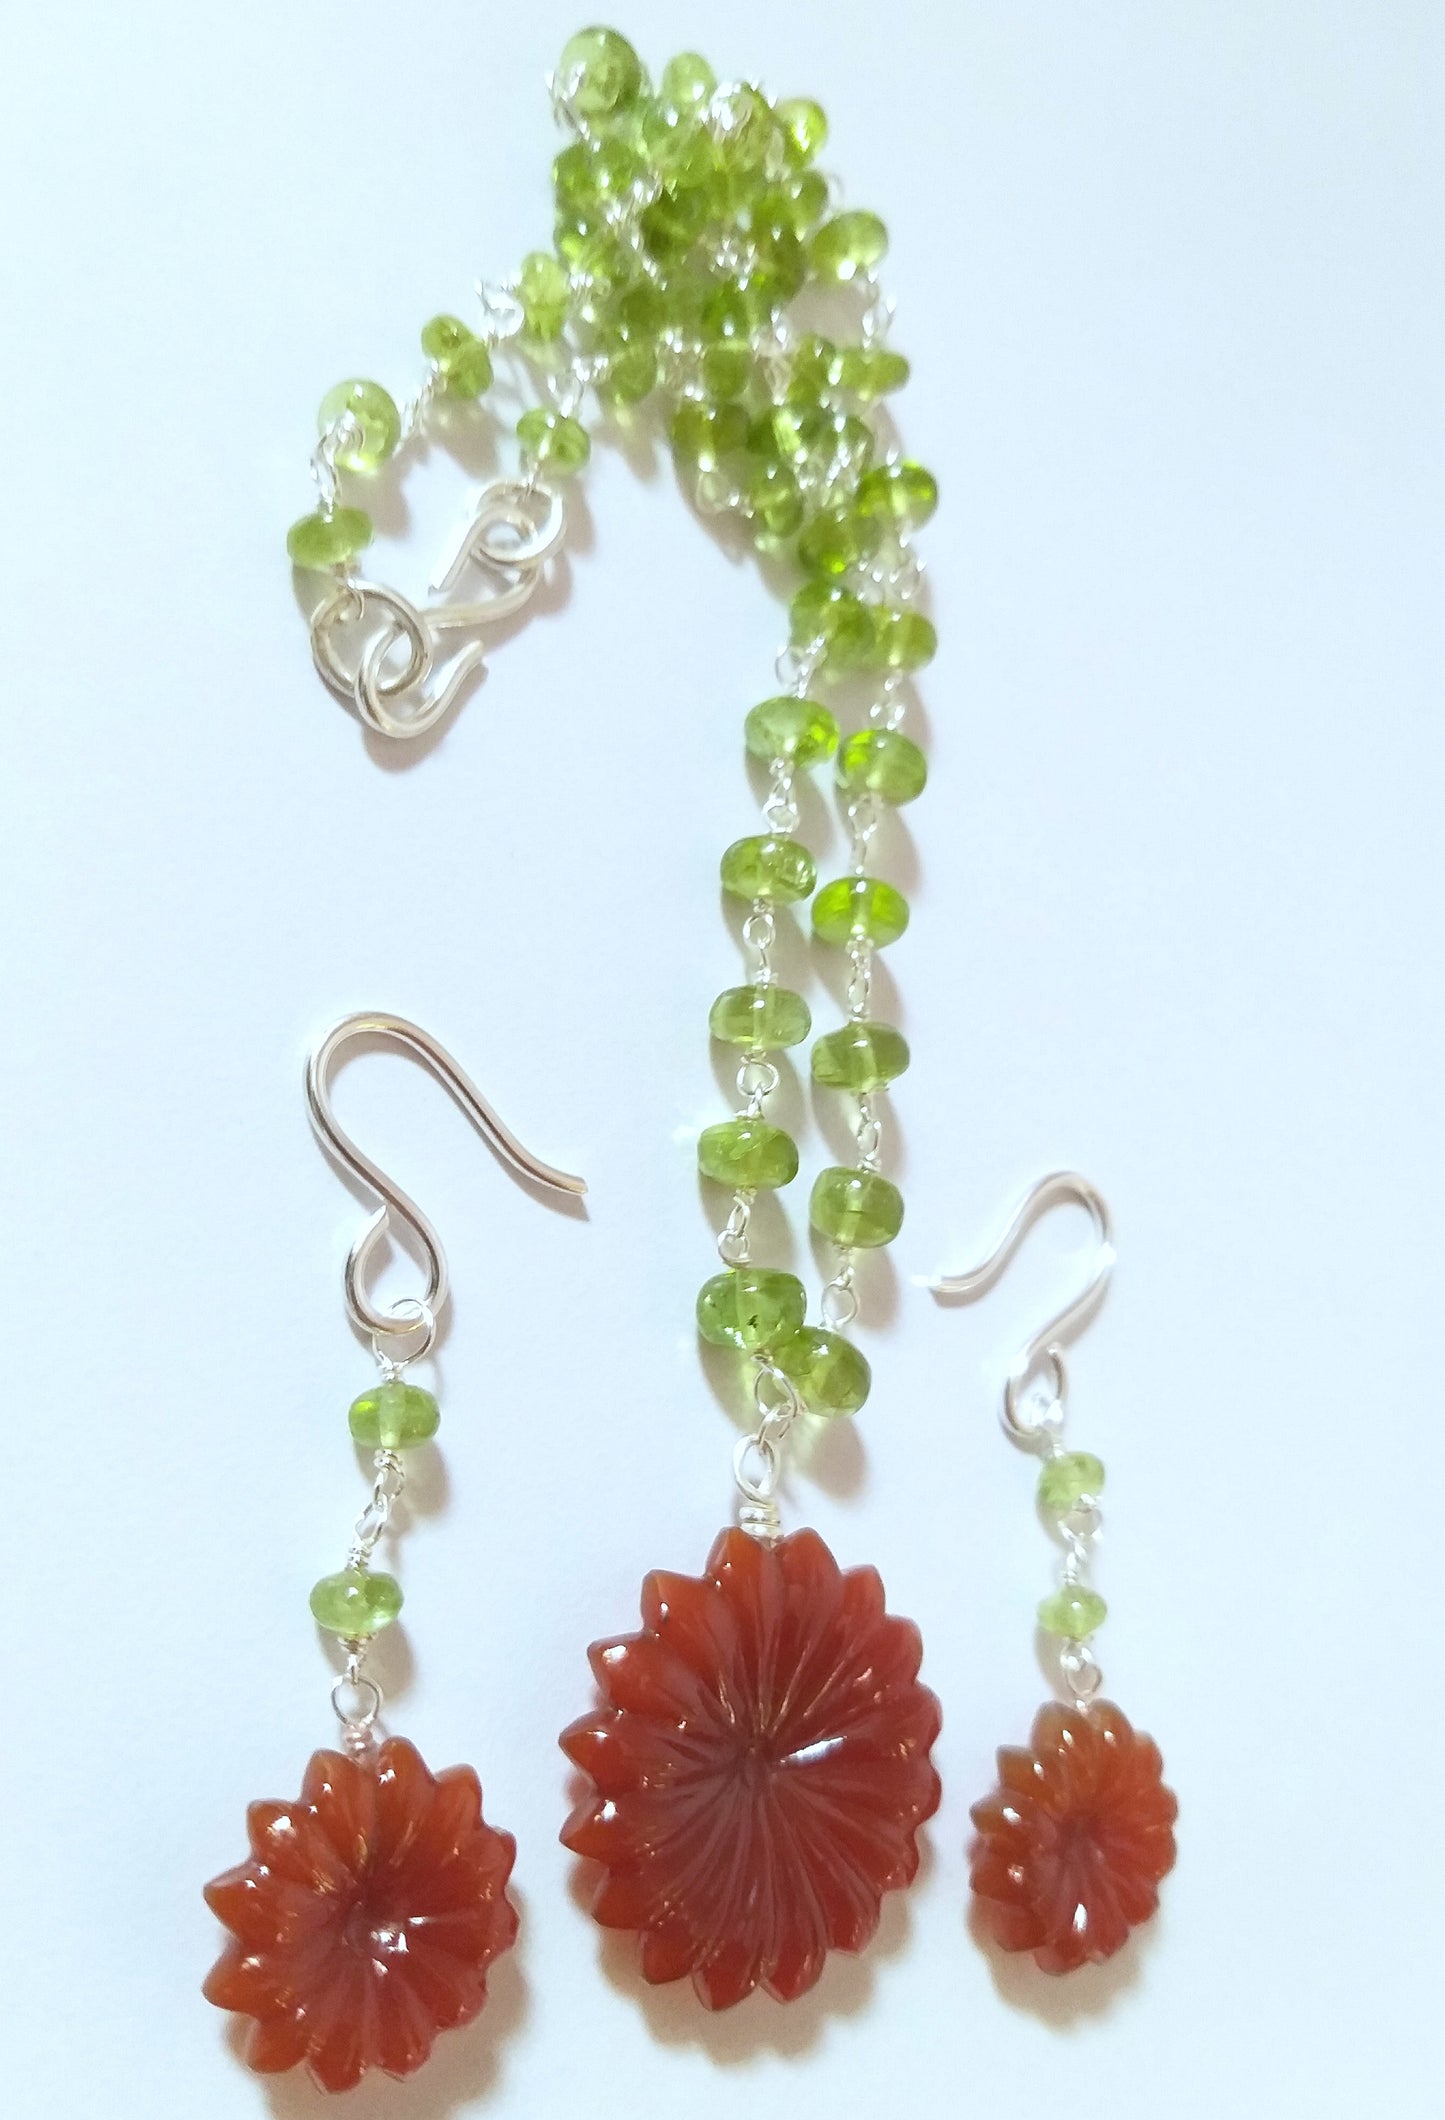 Natural Hand Carved Onyx and Peridot Beads Necklace and Earrings, Jewellery Set, August Birthstone Jewelry